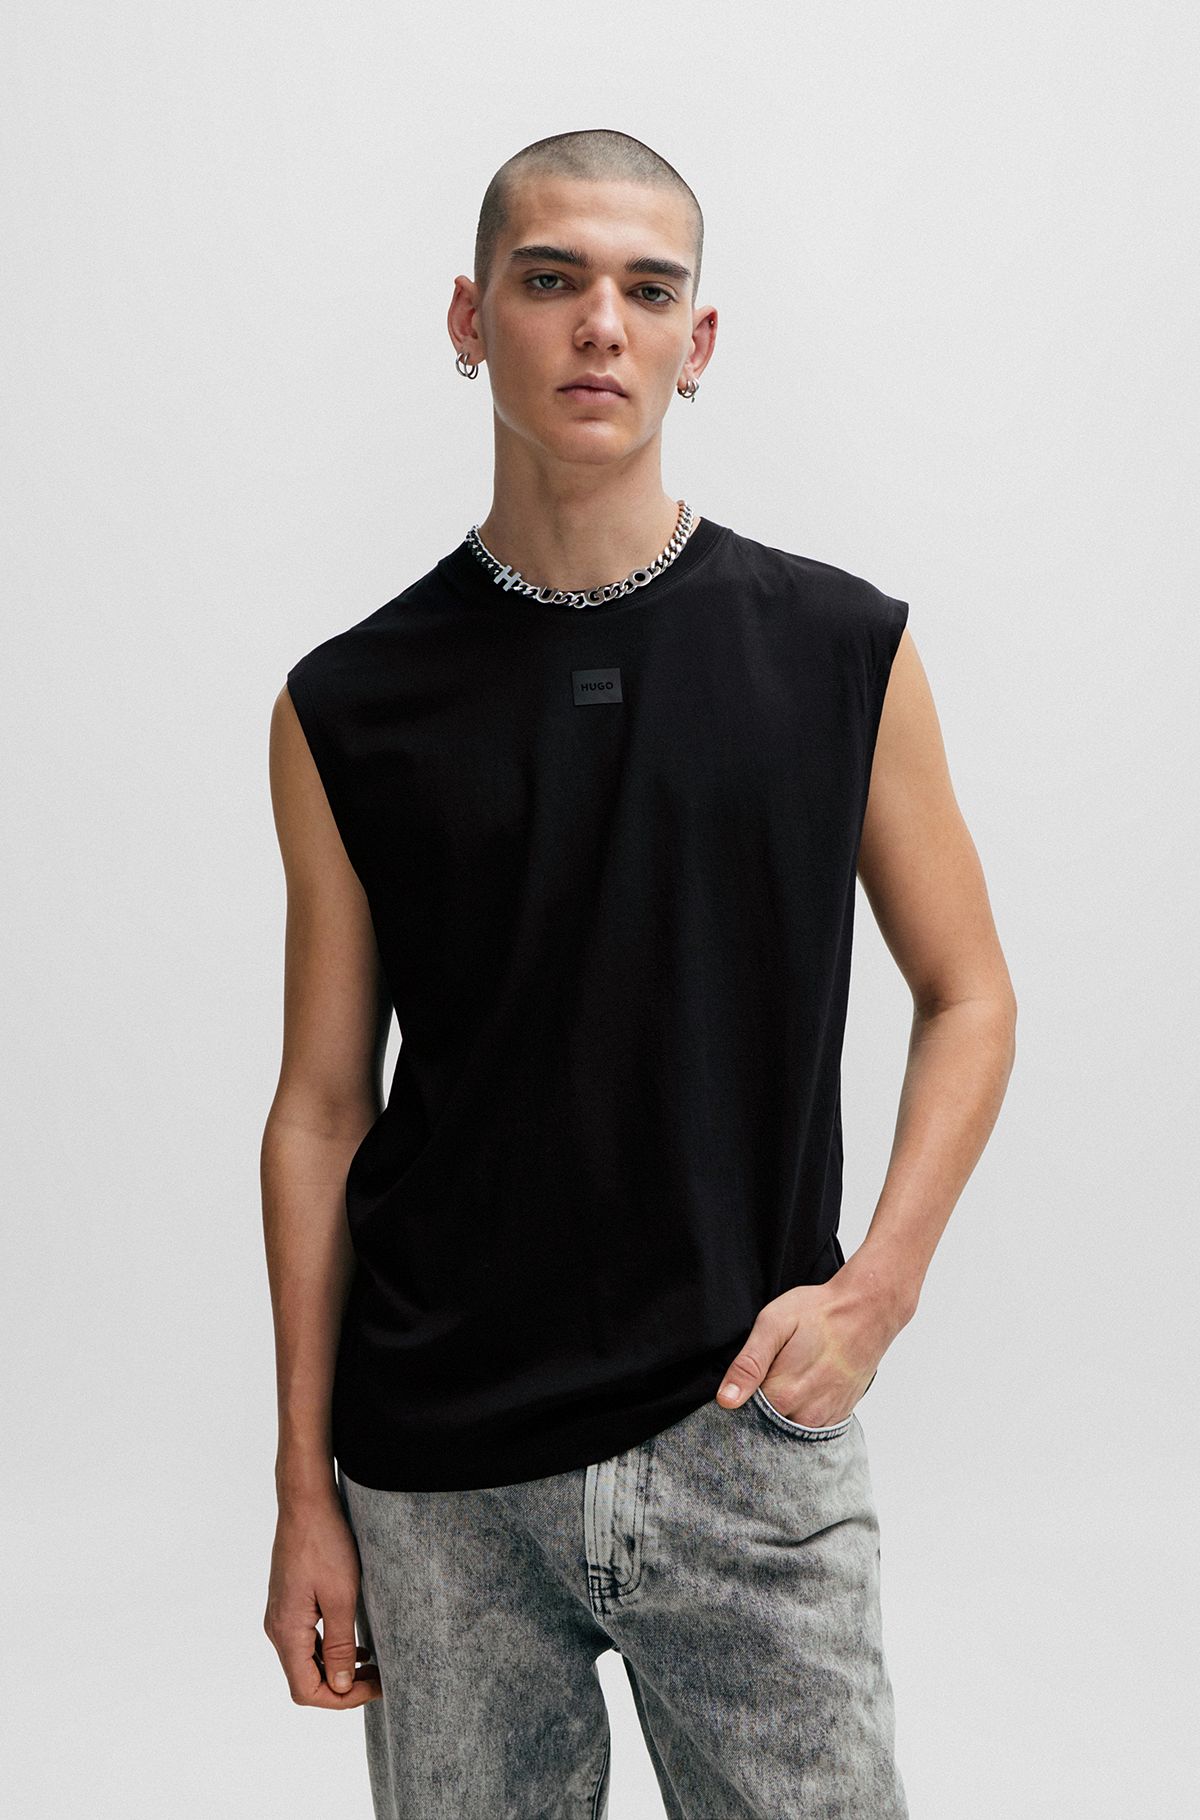 Sleeveless T-shirt in cotton jersey with logo detail, Black